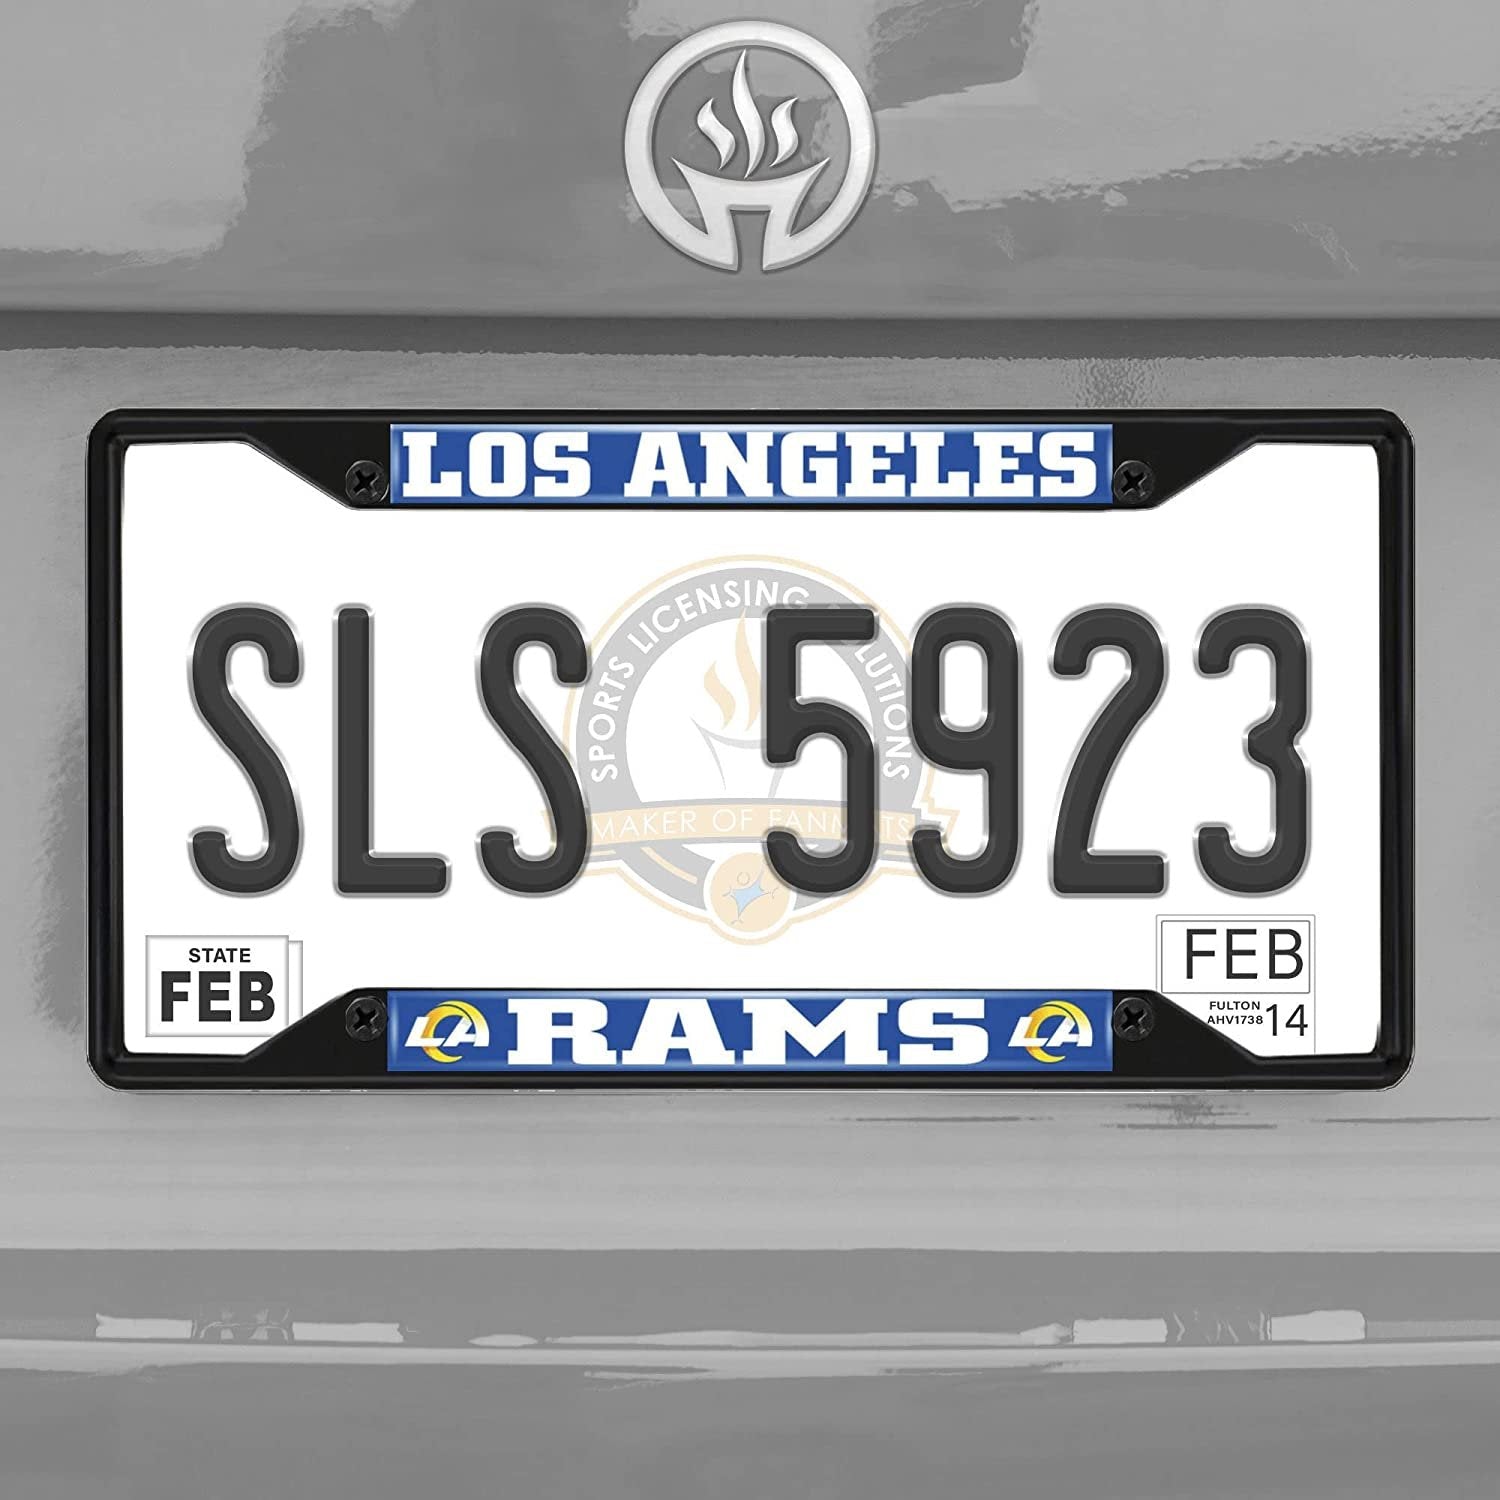 Los Angeles Rams Black Metal License Plate Frame Tag Cover, 6x12 Inch